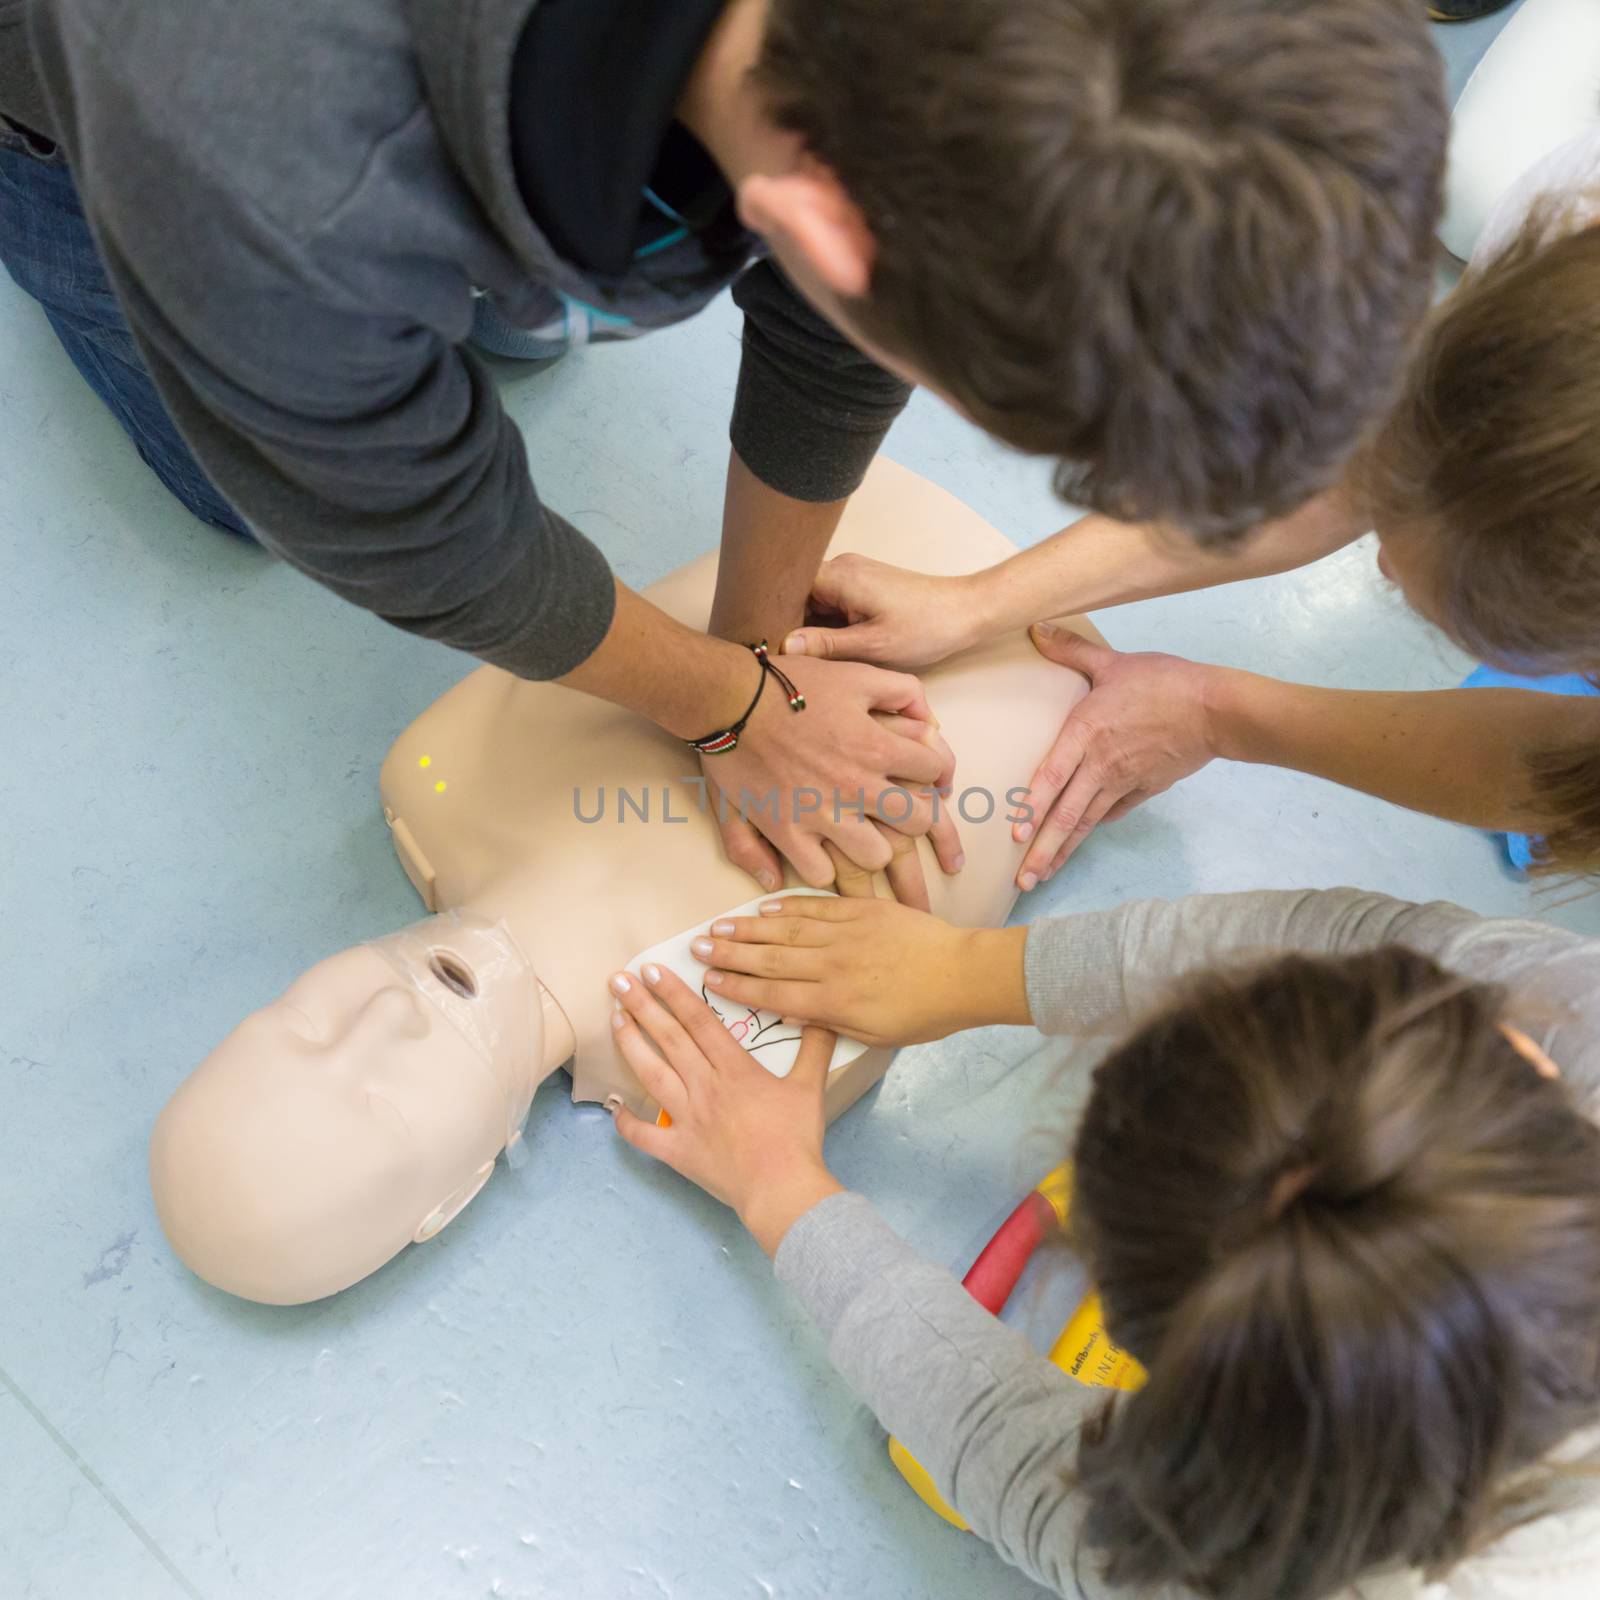 First aid cardiopulmonary resuscitation course using automated external defibrillator device, AED.